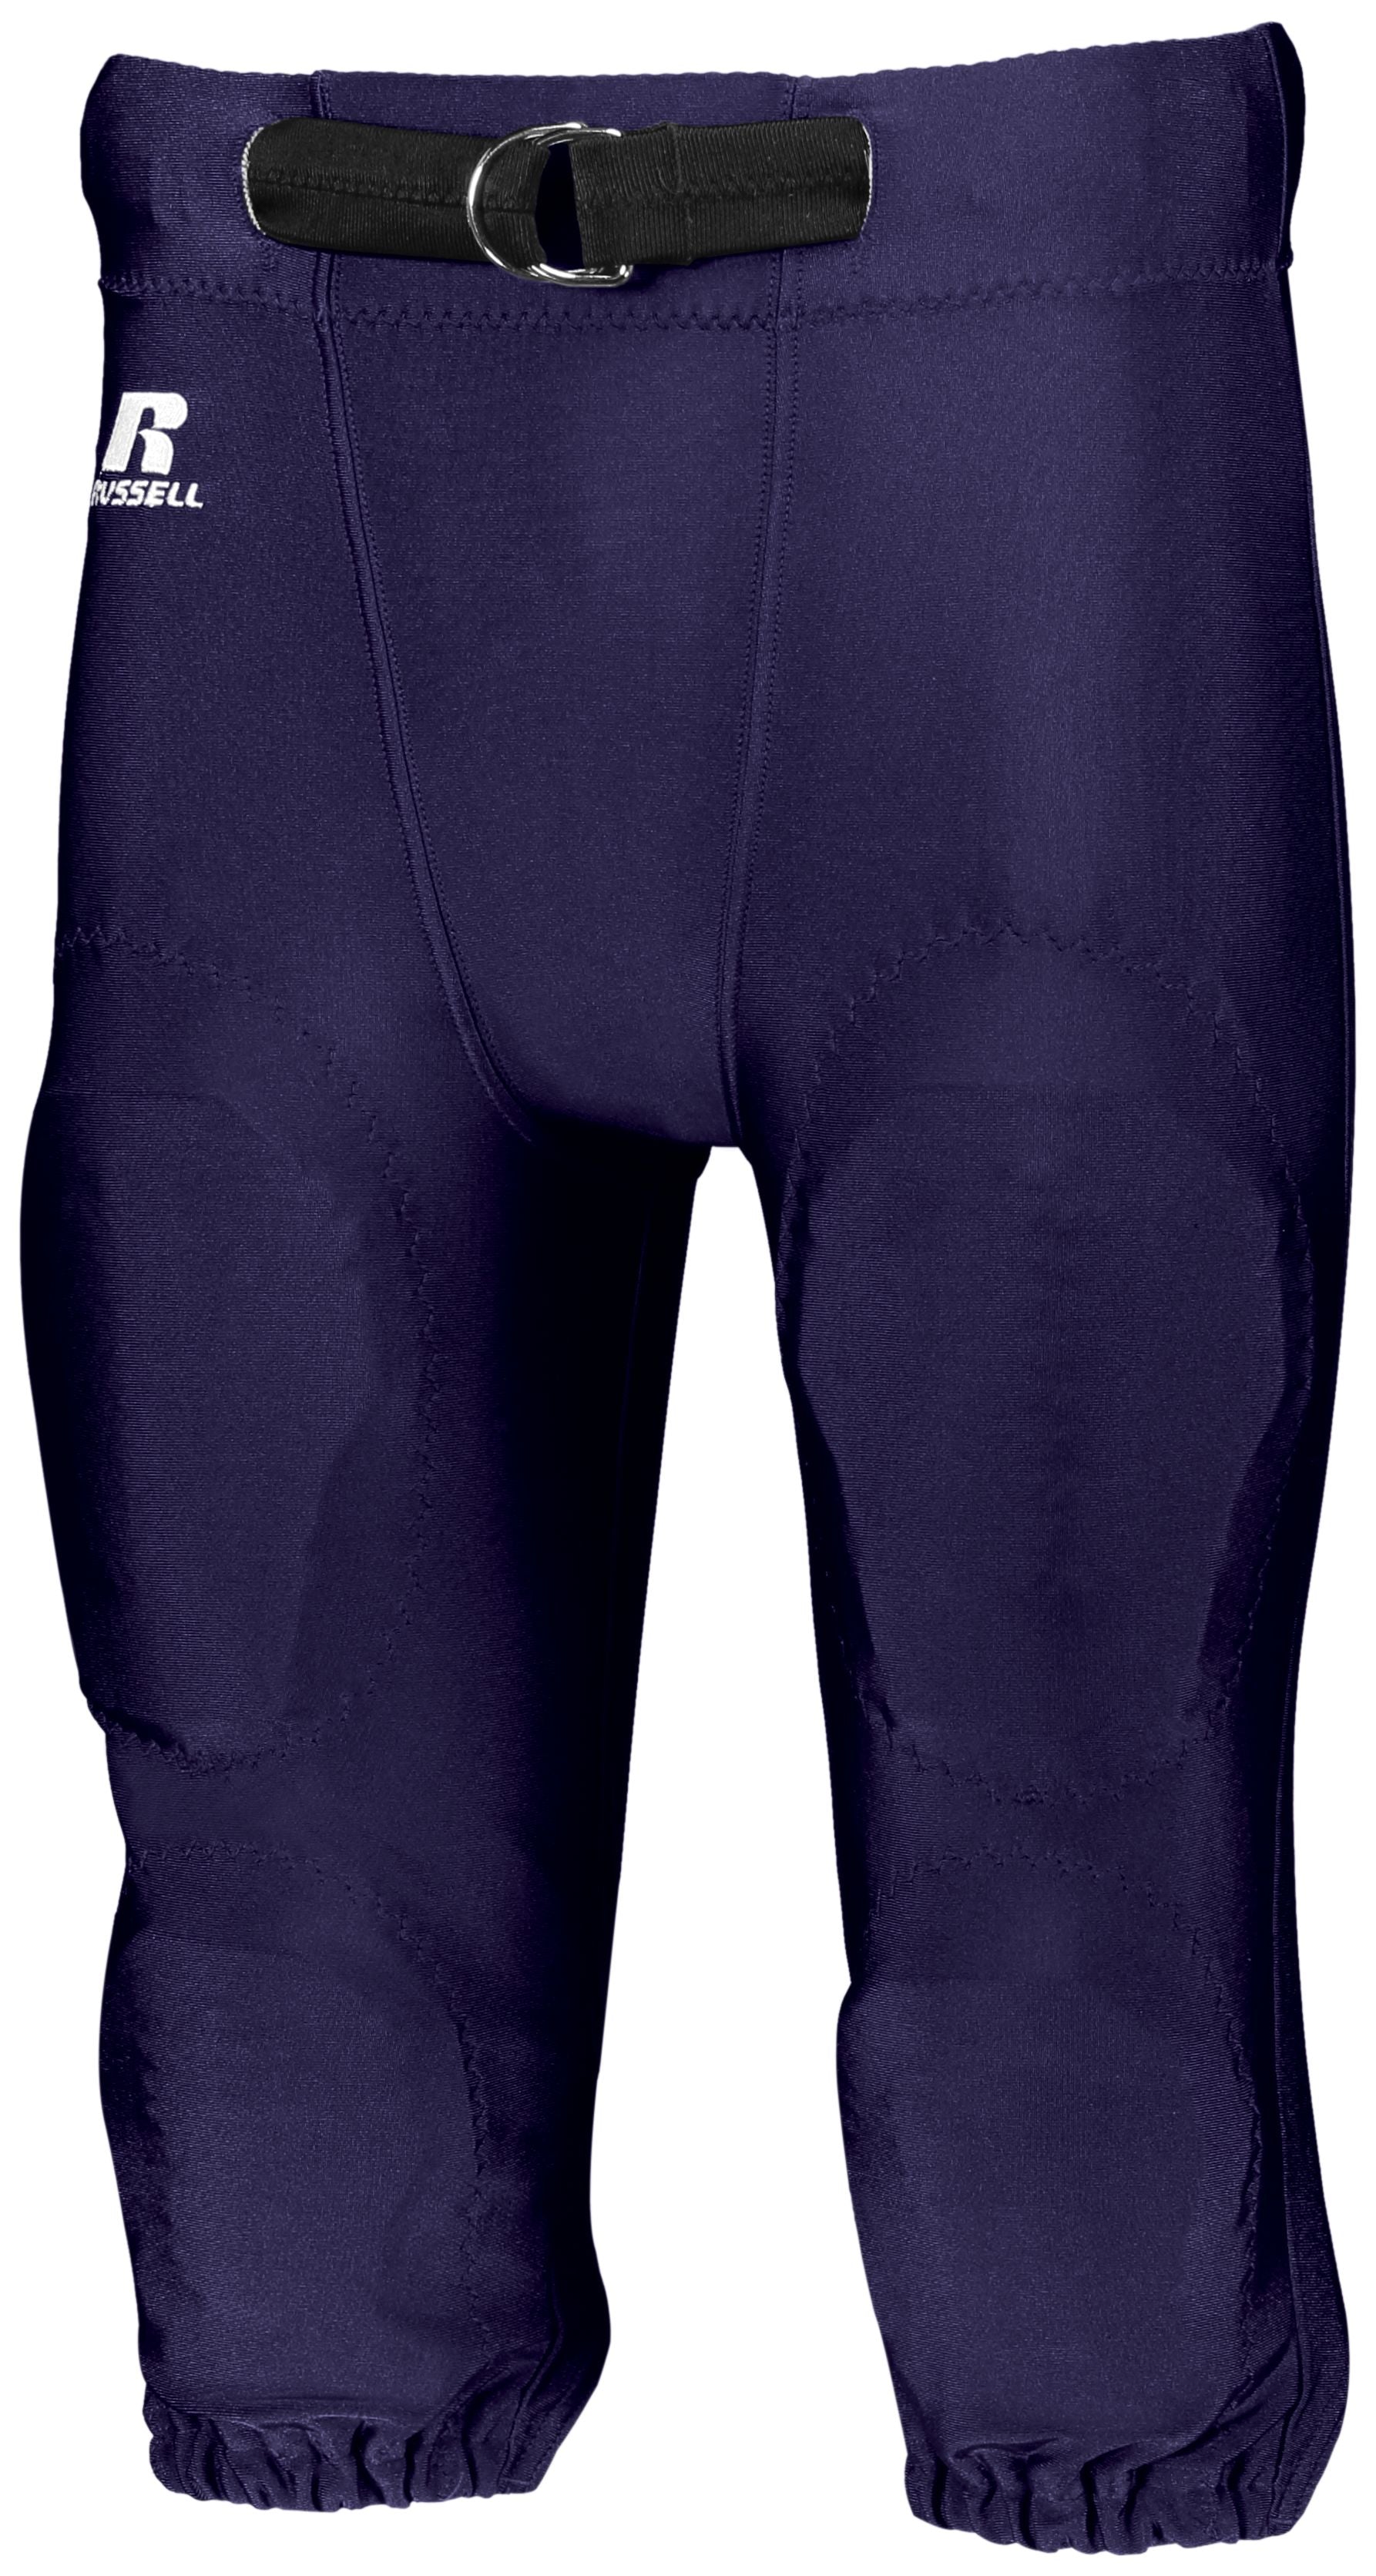 Russell Athletic Deluxe Game Pant in Purple  -Part of the Adult, Adult-Pants, Pants, Football, Russell-Athletic-Products, All-Sports, All-Sports-1 product lines at KanaleyCreations.com